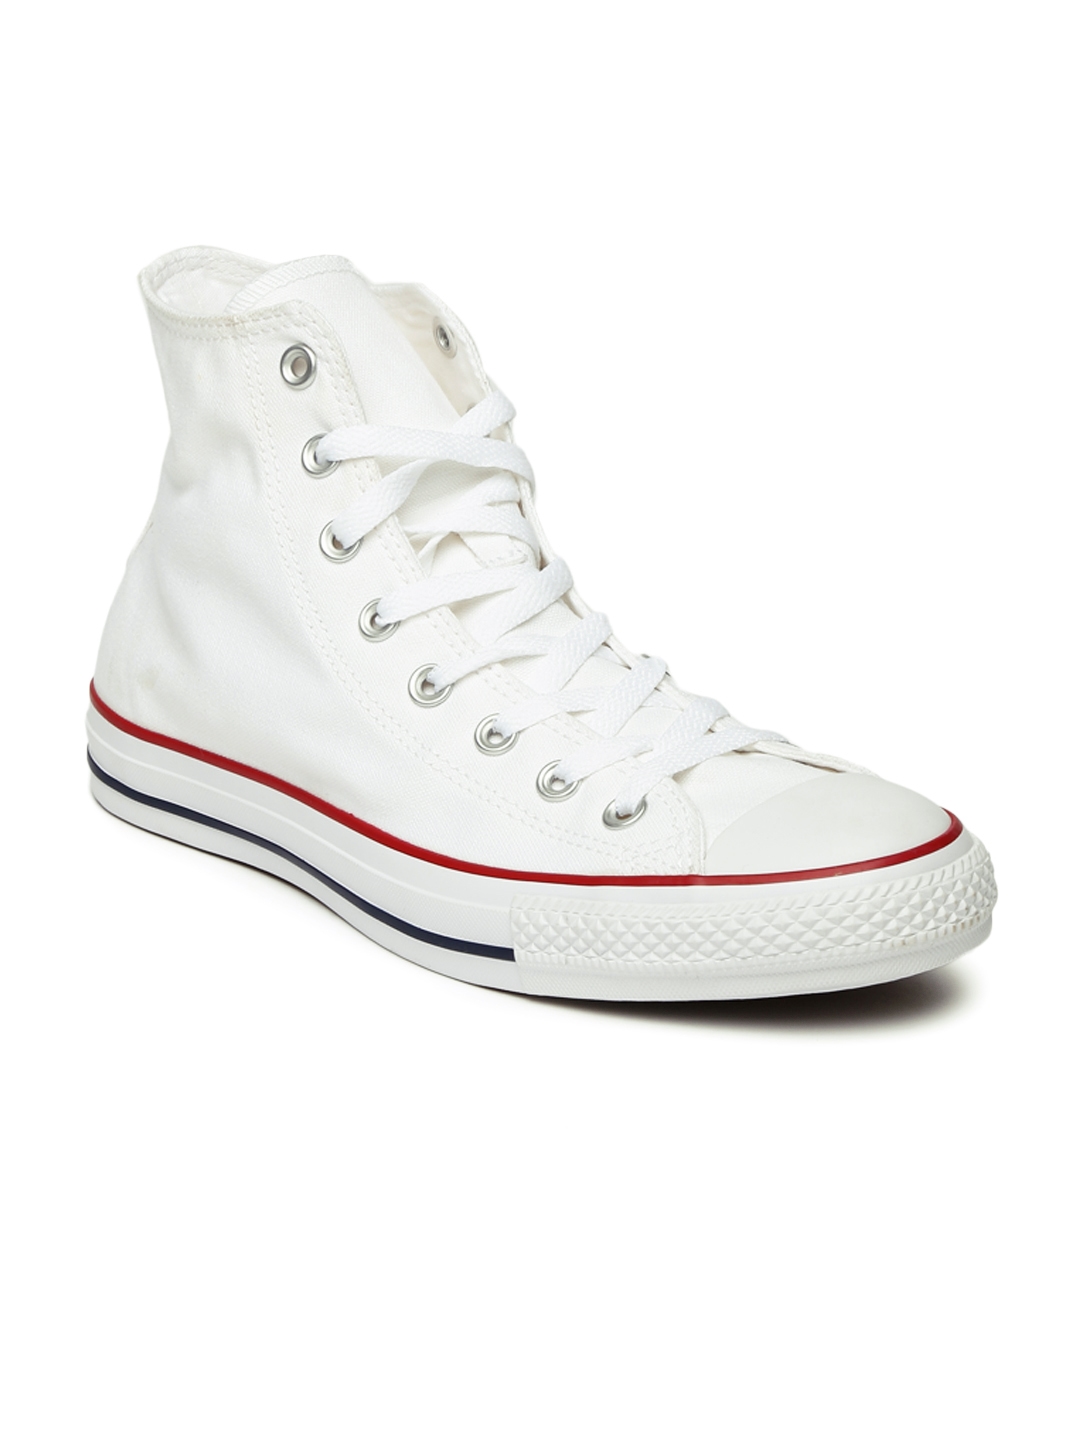 Buy Converse Unisex Off White High Top Sneakers - Casual Shoes for Unisex  1338546 | Myntra